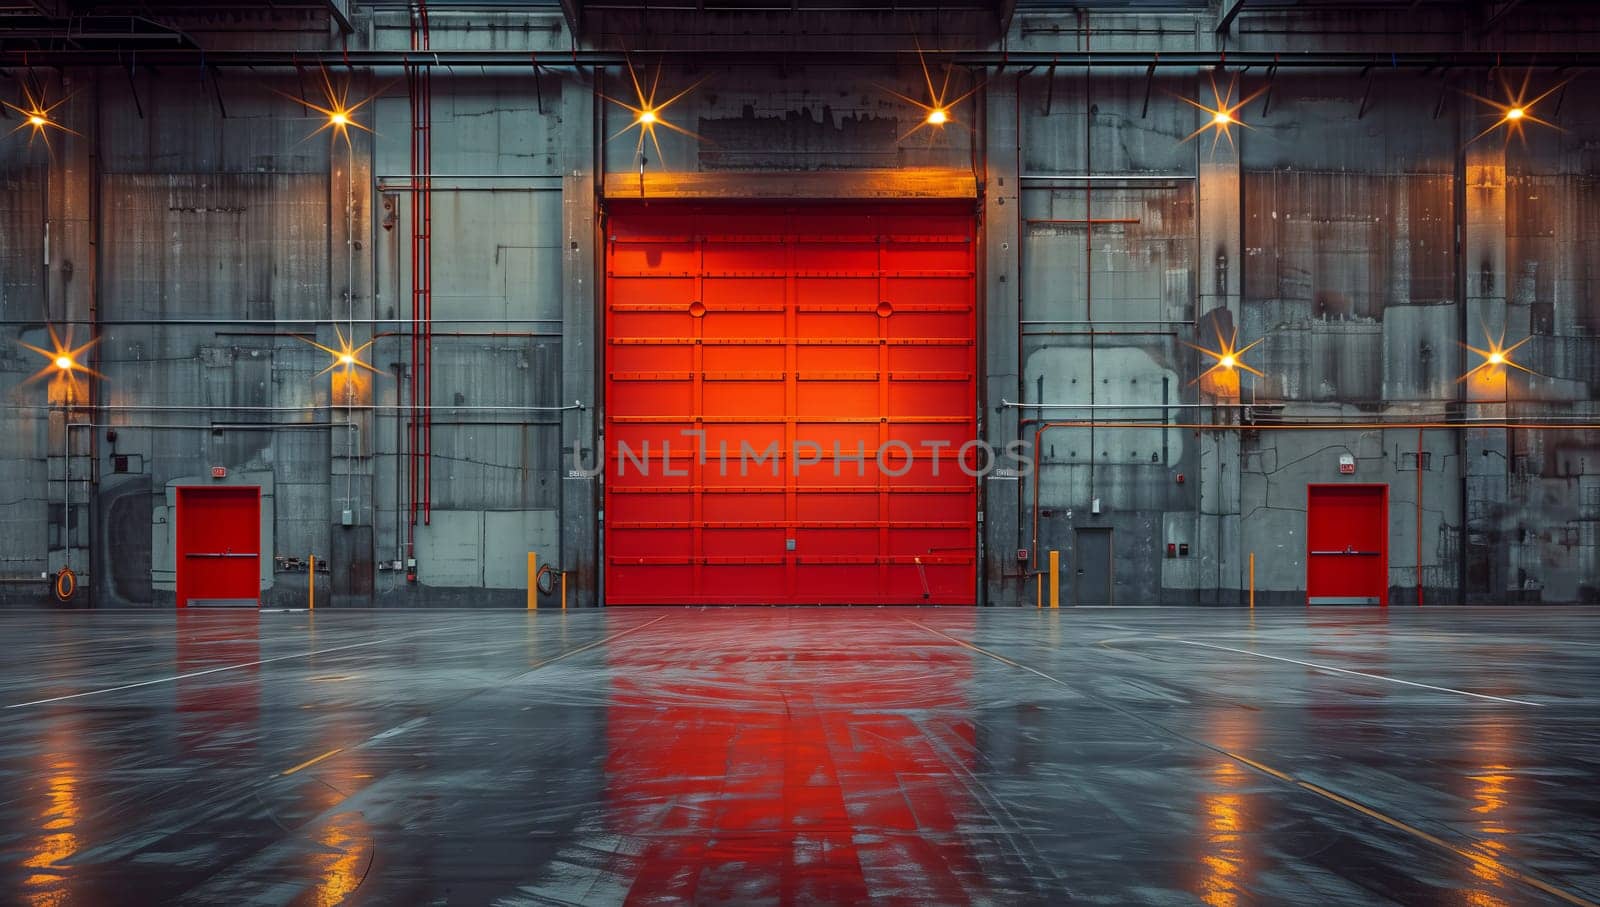 A spacious warehouse featuring a red garage door, automotive lighting fixtures, tinted windows, and a water event area. The flooring includes various tints and shades